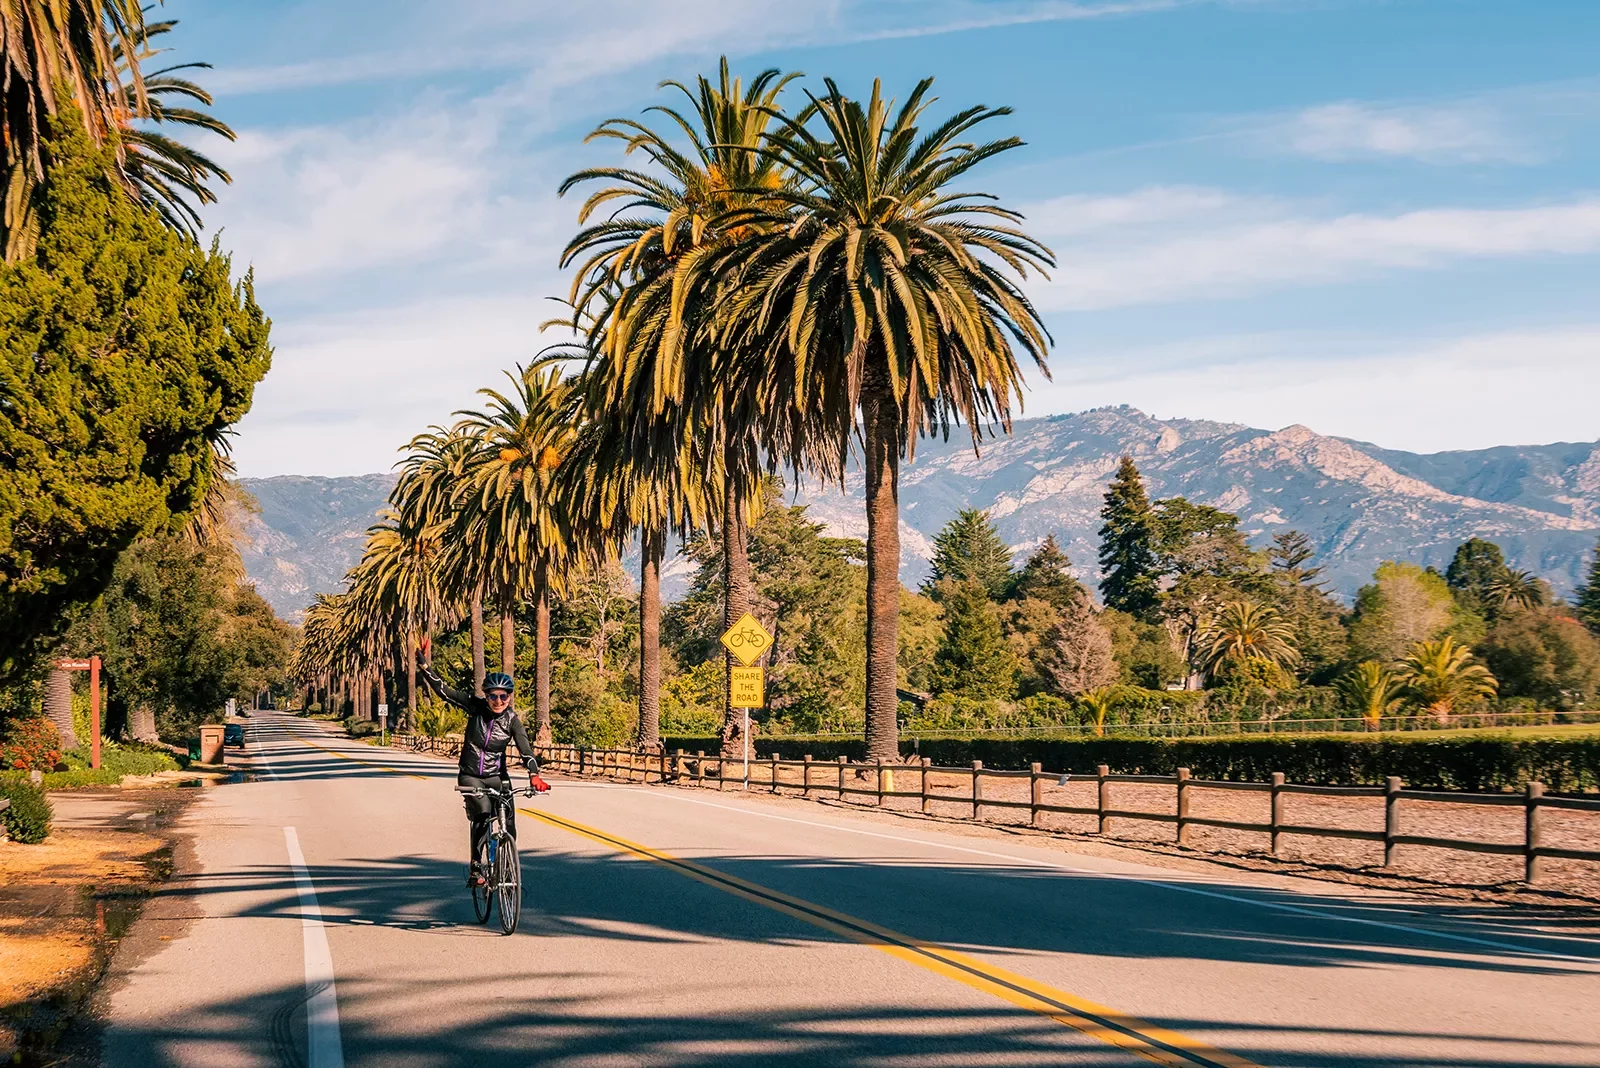 Guest cycling down road, waving to camera, palm trees lining road on  their left.